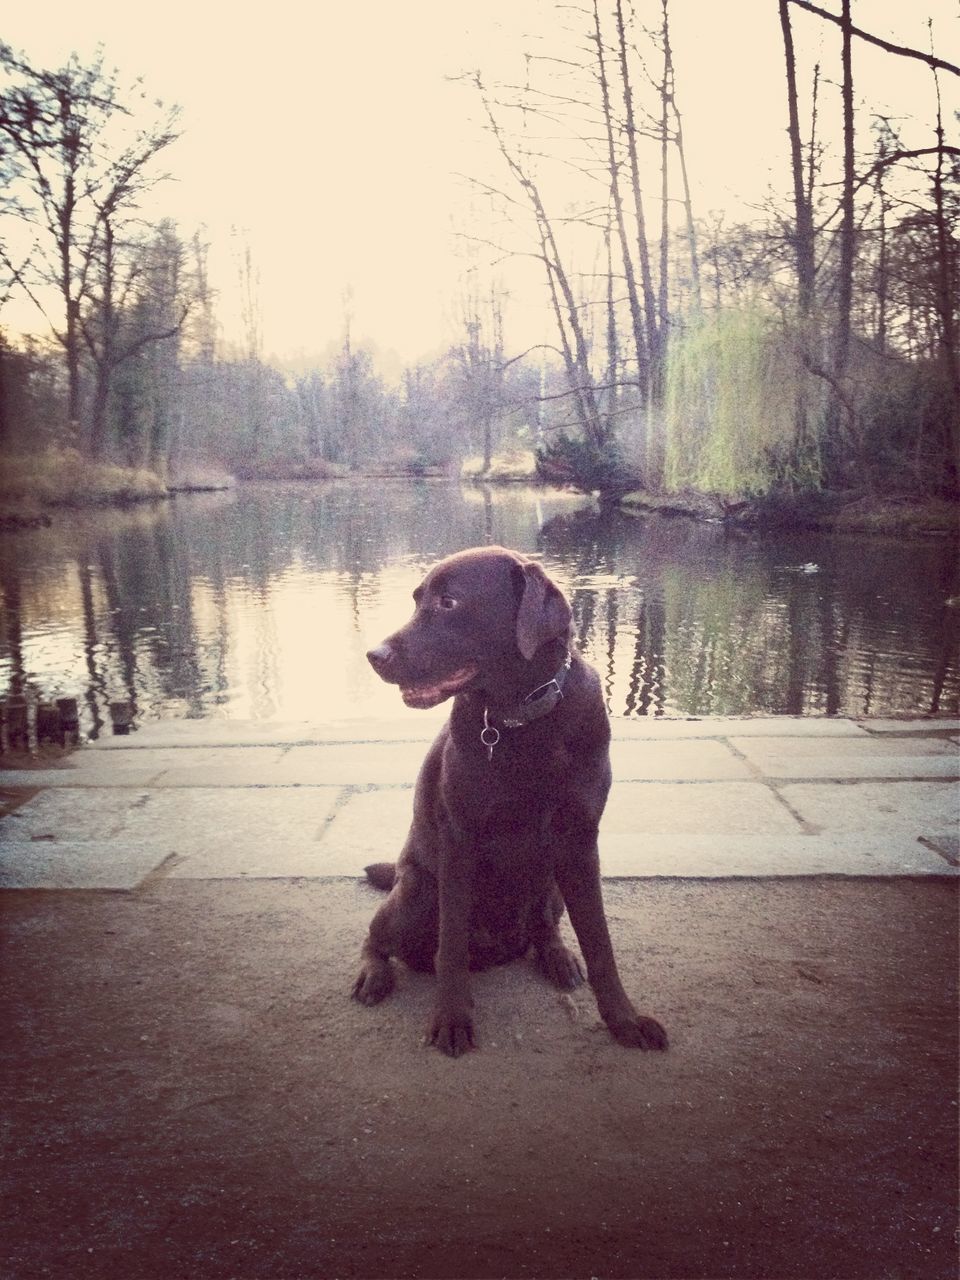 dog, pets, one animal, animal themes, domestic animals, mammal, water, tree, lake, full length, sitting, reflection, canine, nature, standing, outdoors, sky, black color, river, bare tree